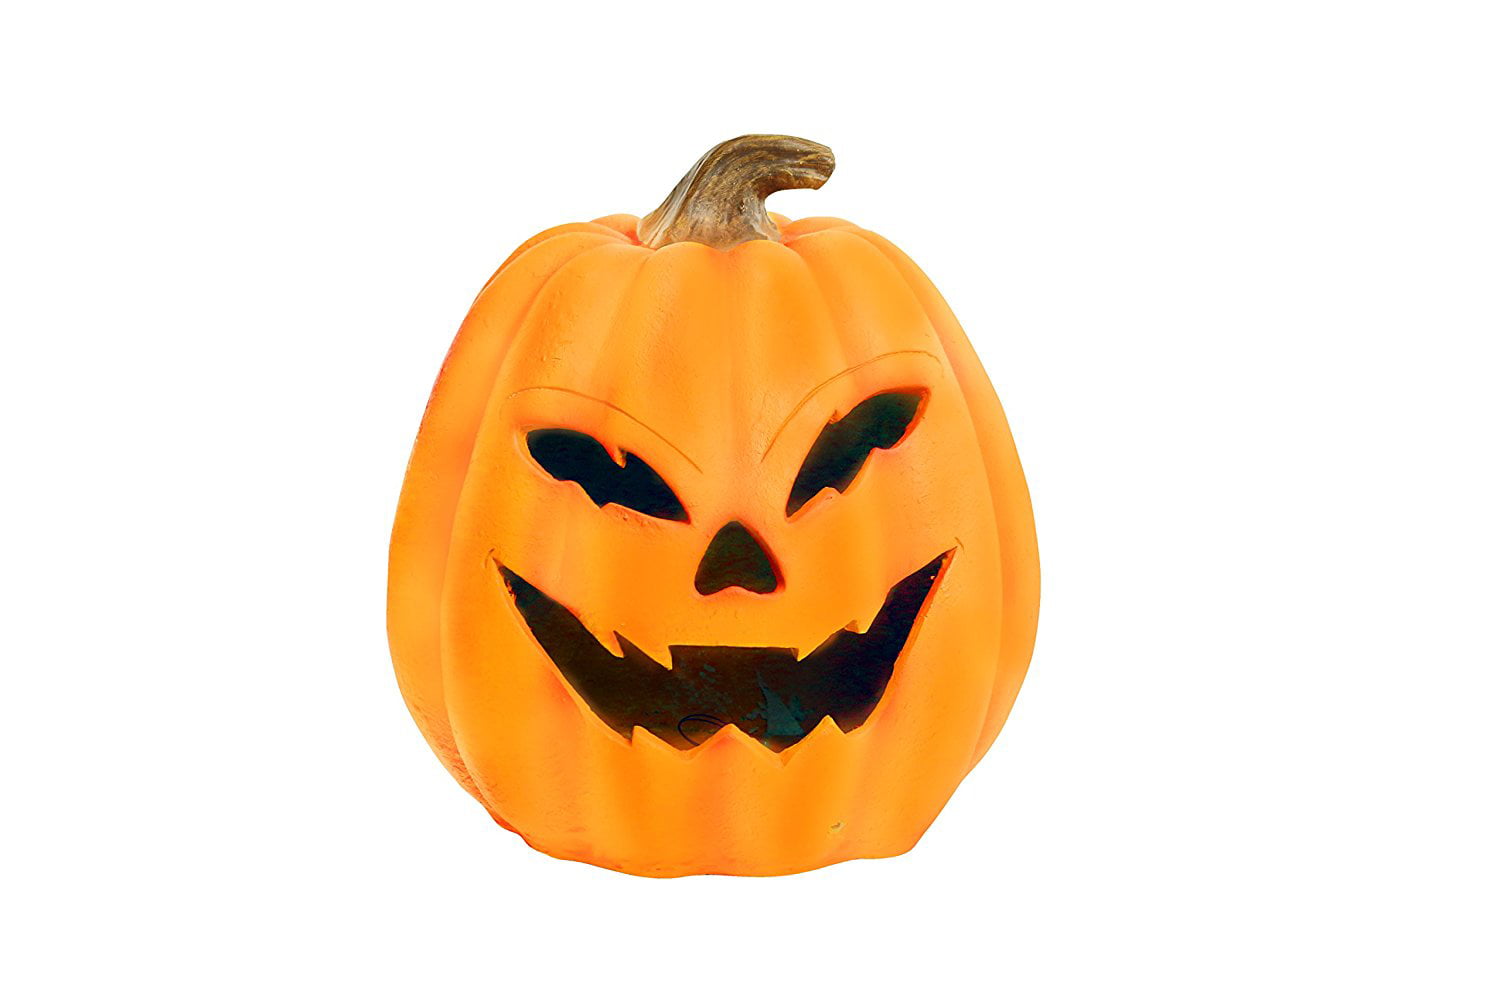 Alpine Motion Activated Pumpkin with Yellow LEDs, 17 Inch Tall ...